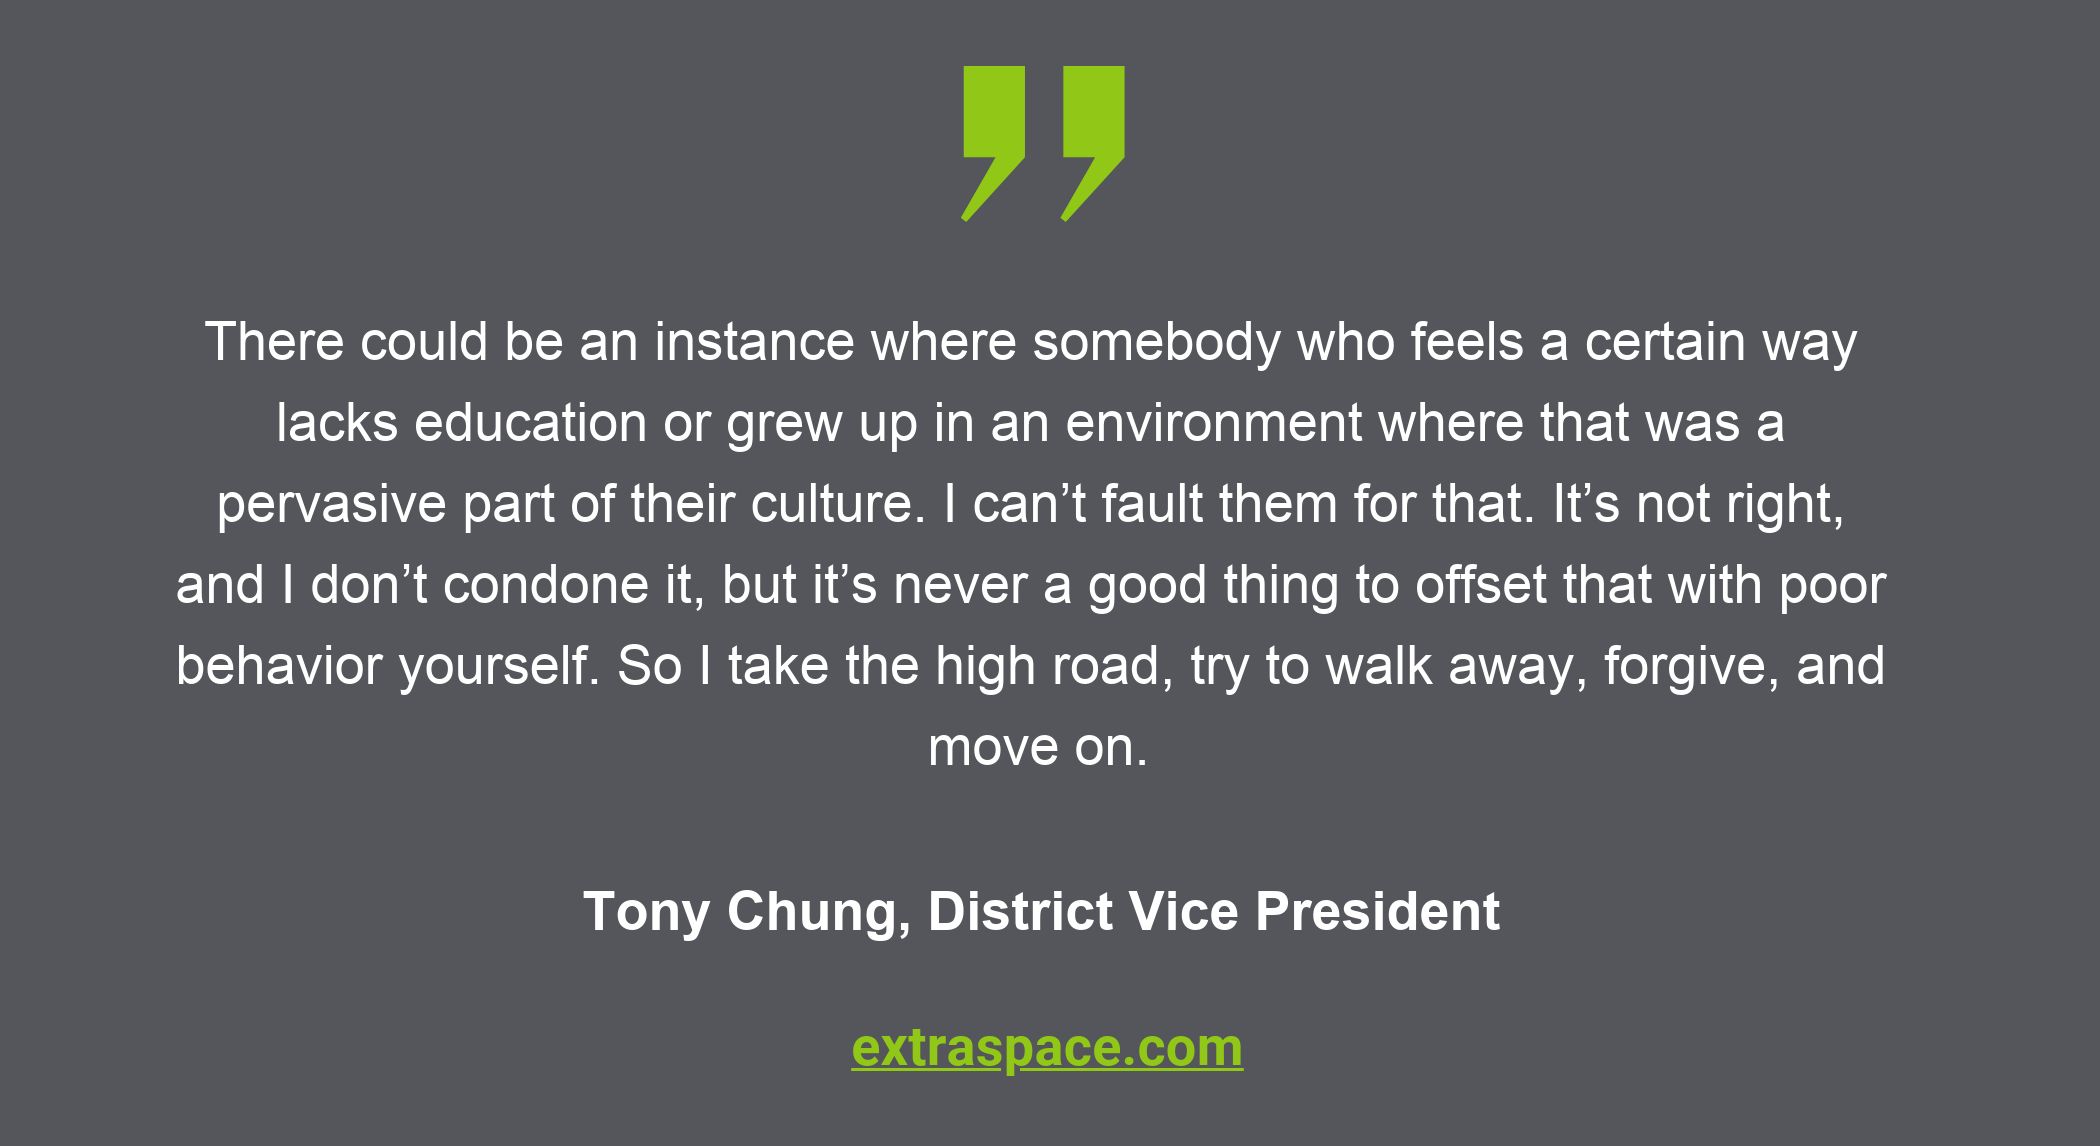 AAPI Month Roundtable quote from Extra Space Storage